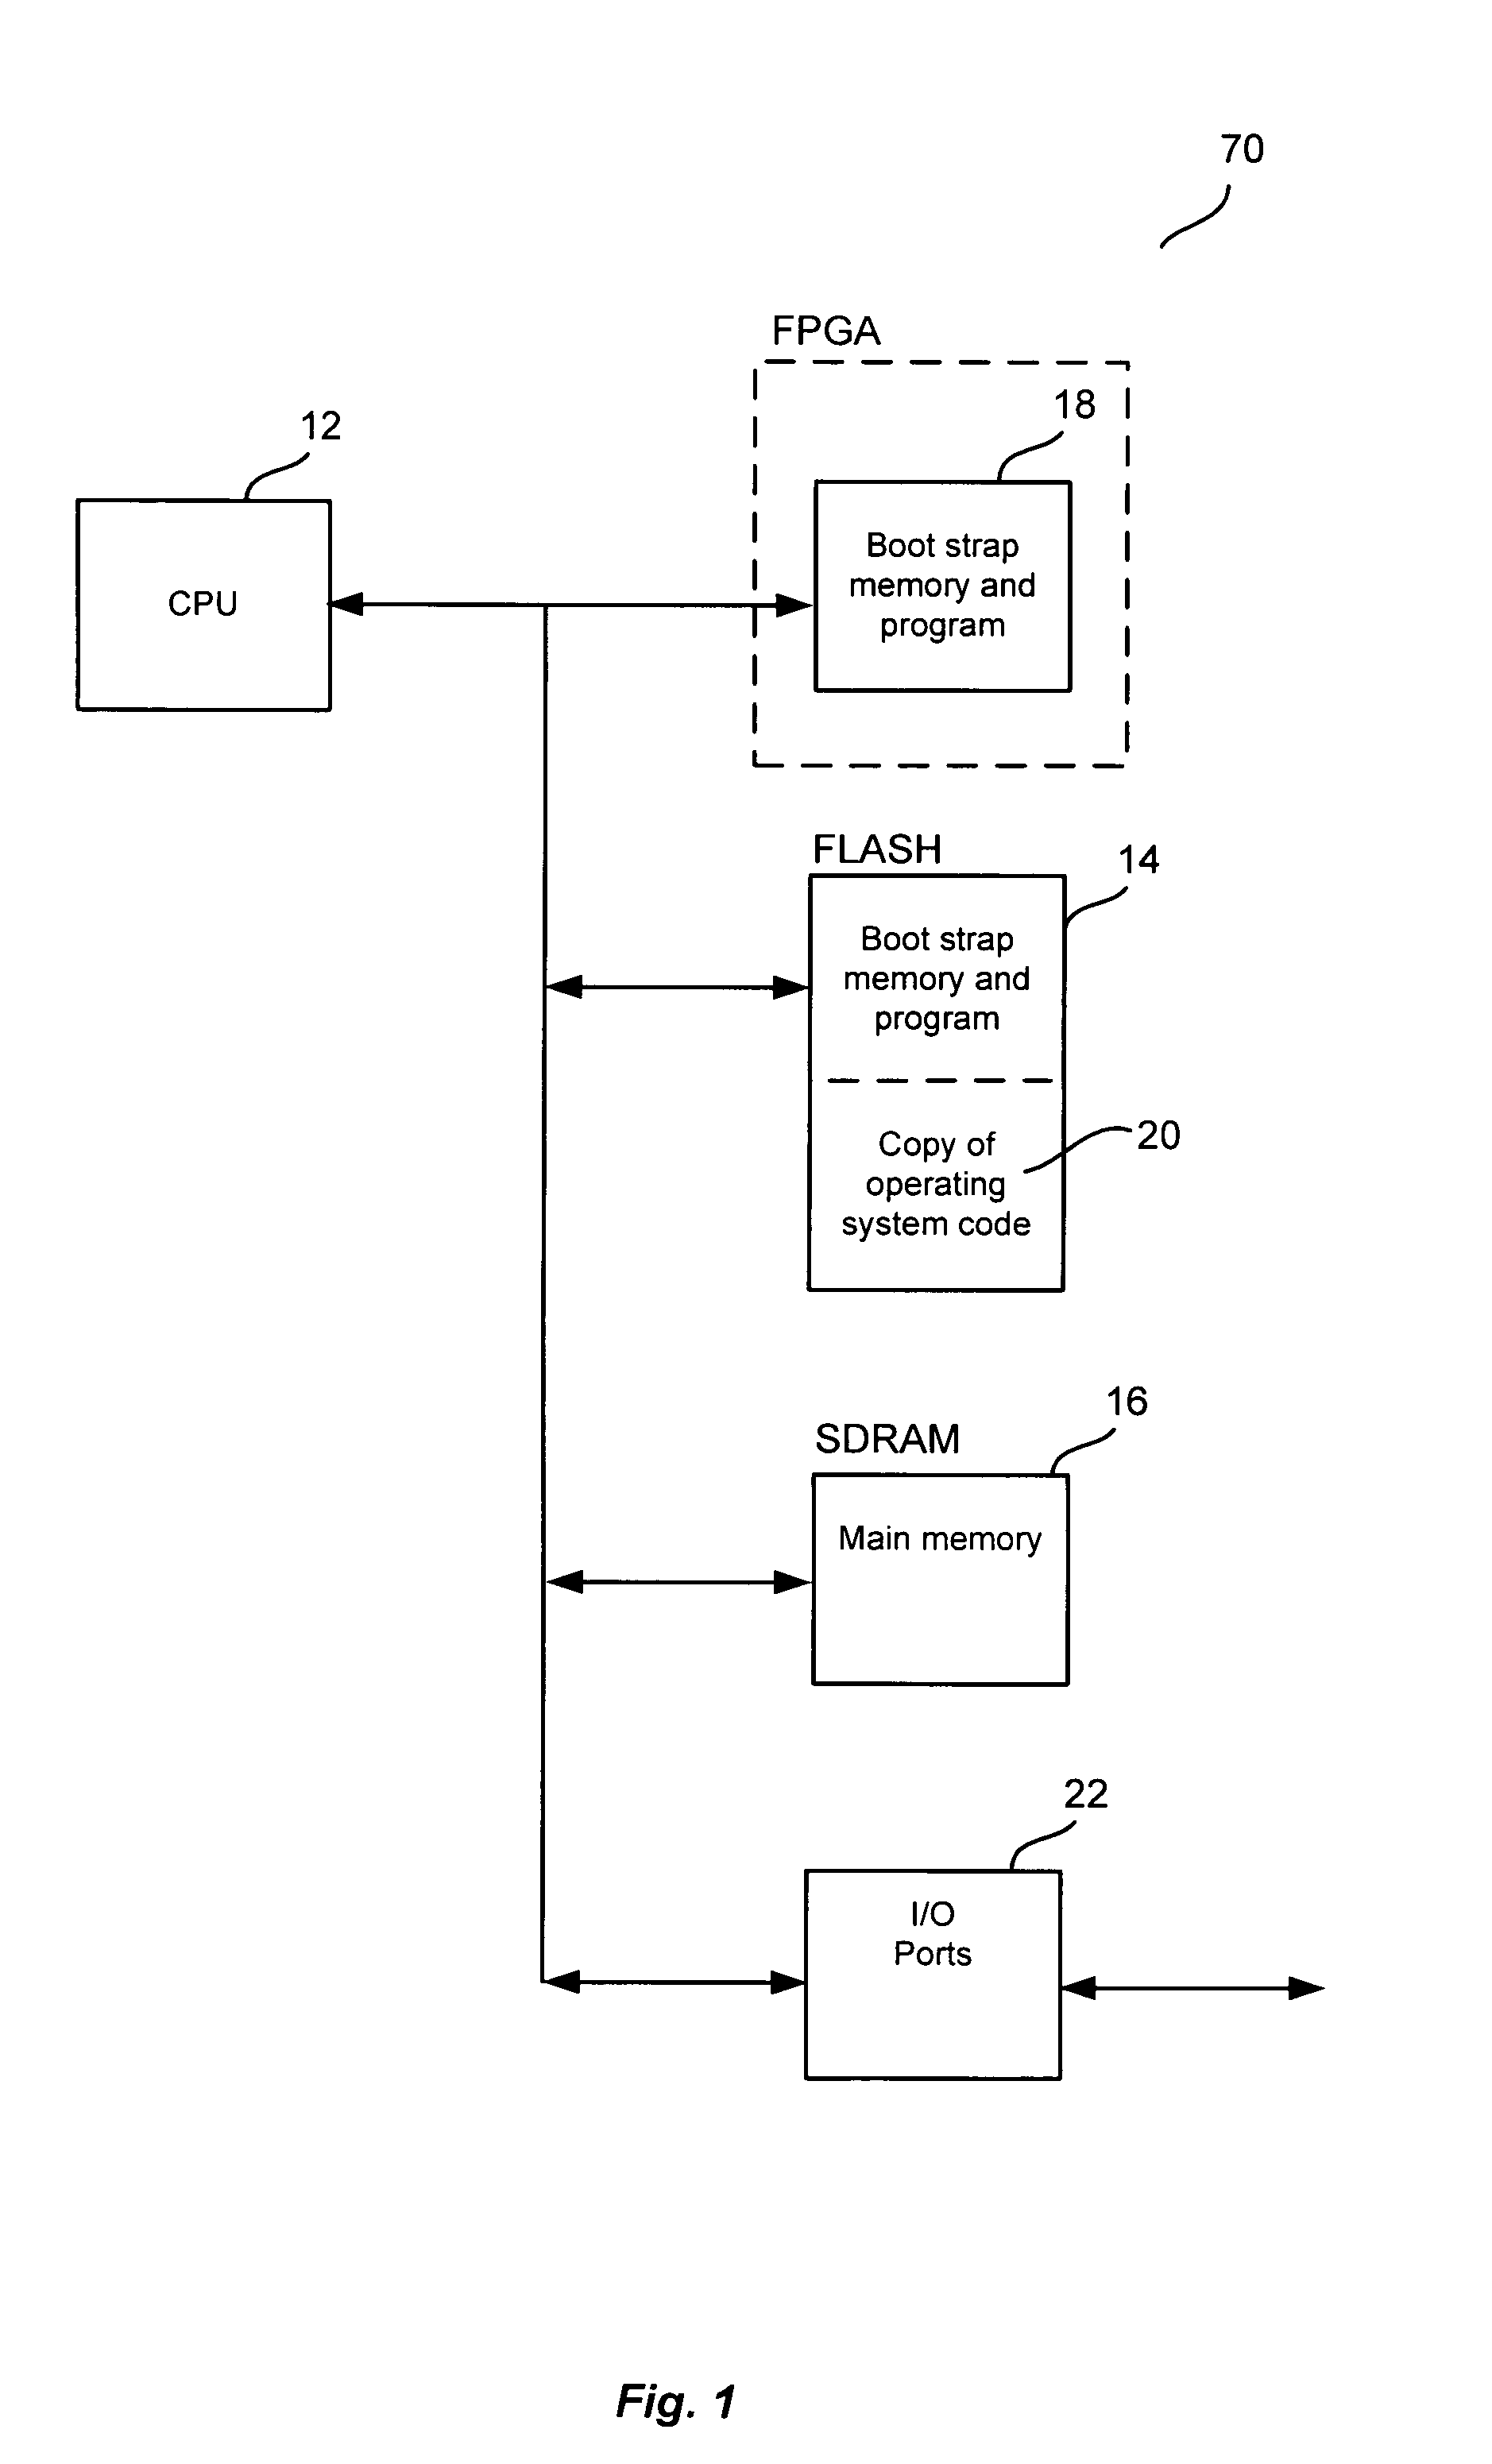 Method and system to provide first boot to a CPU system